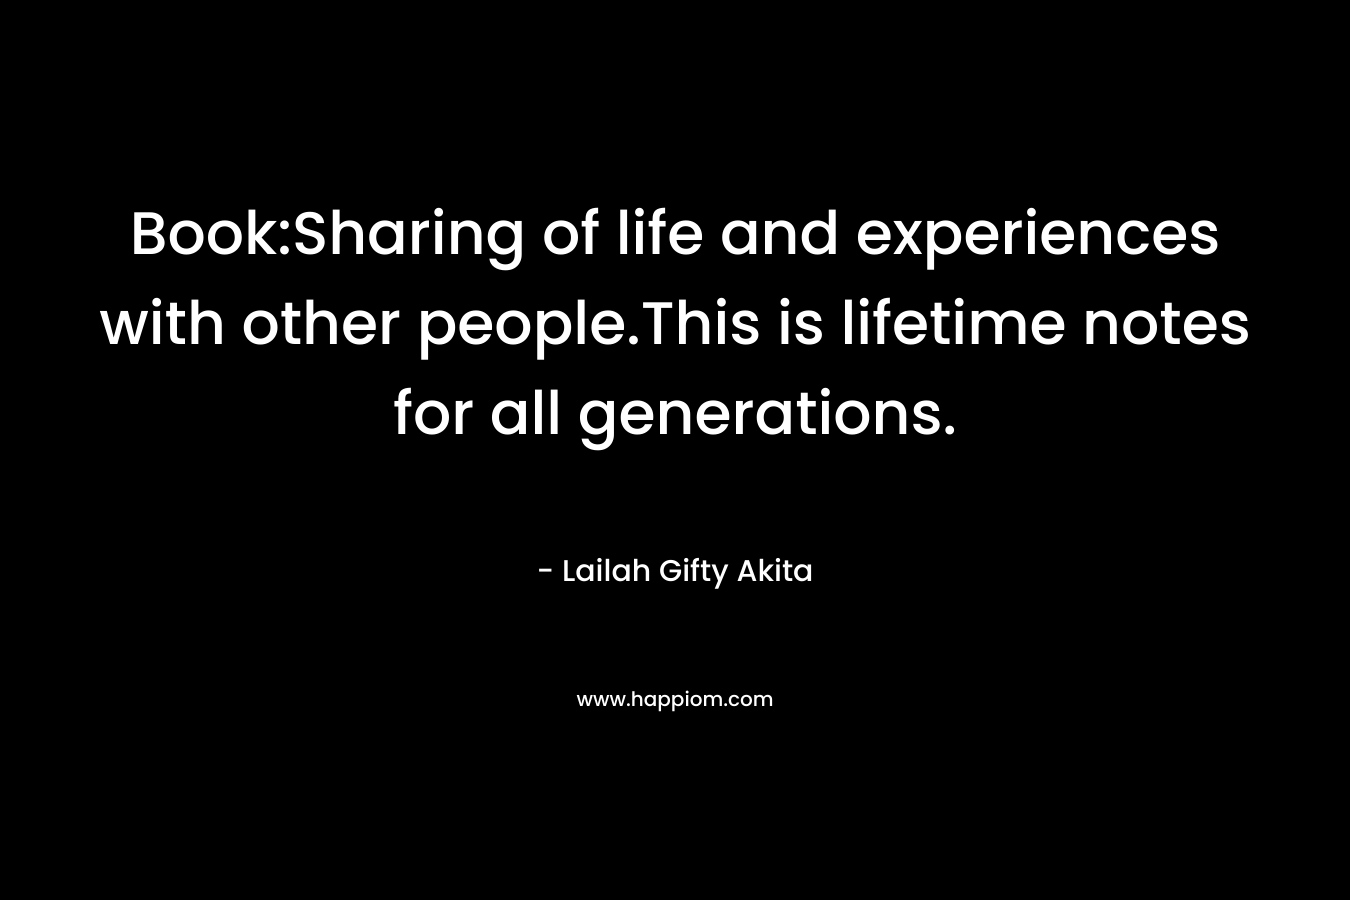 Book:Sharing of life and experiences with other people.This is lifetime notes for all generations.